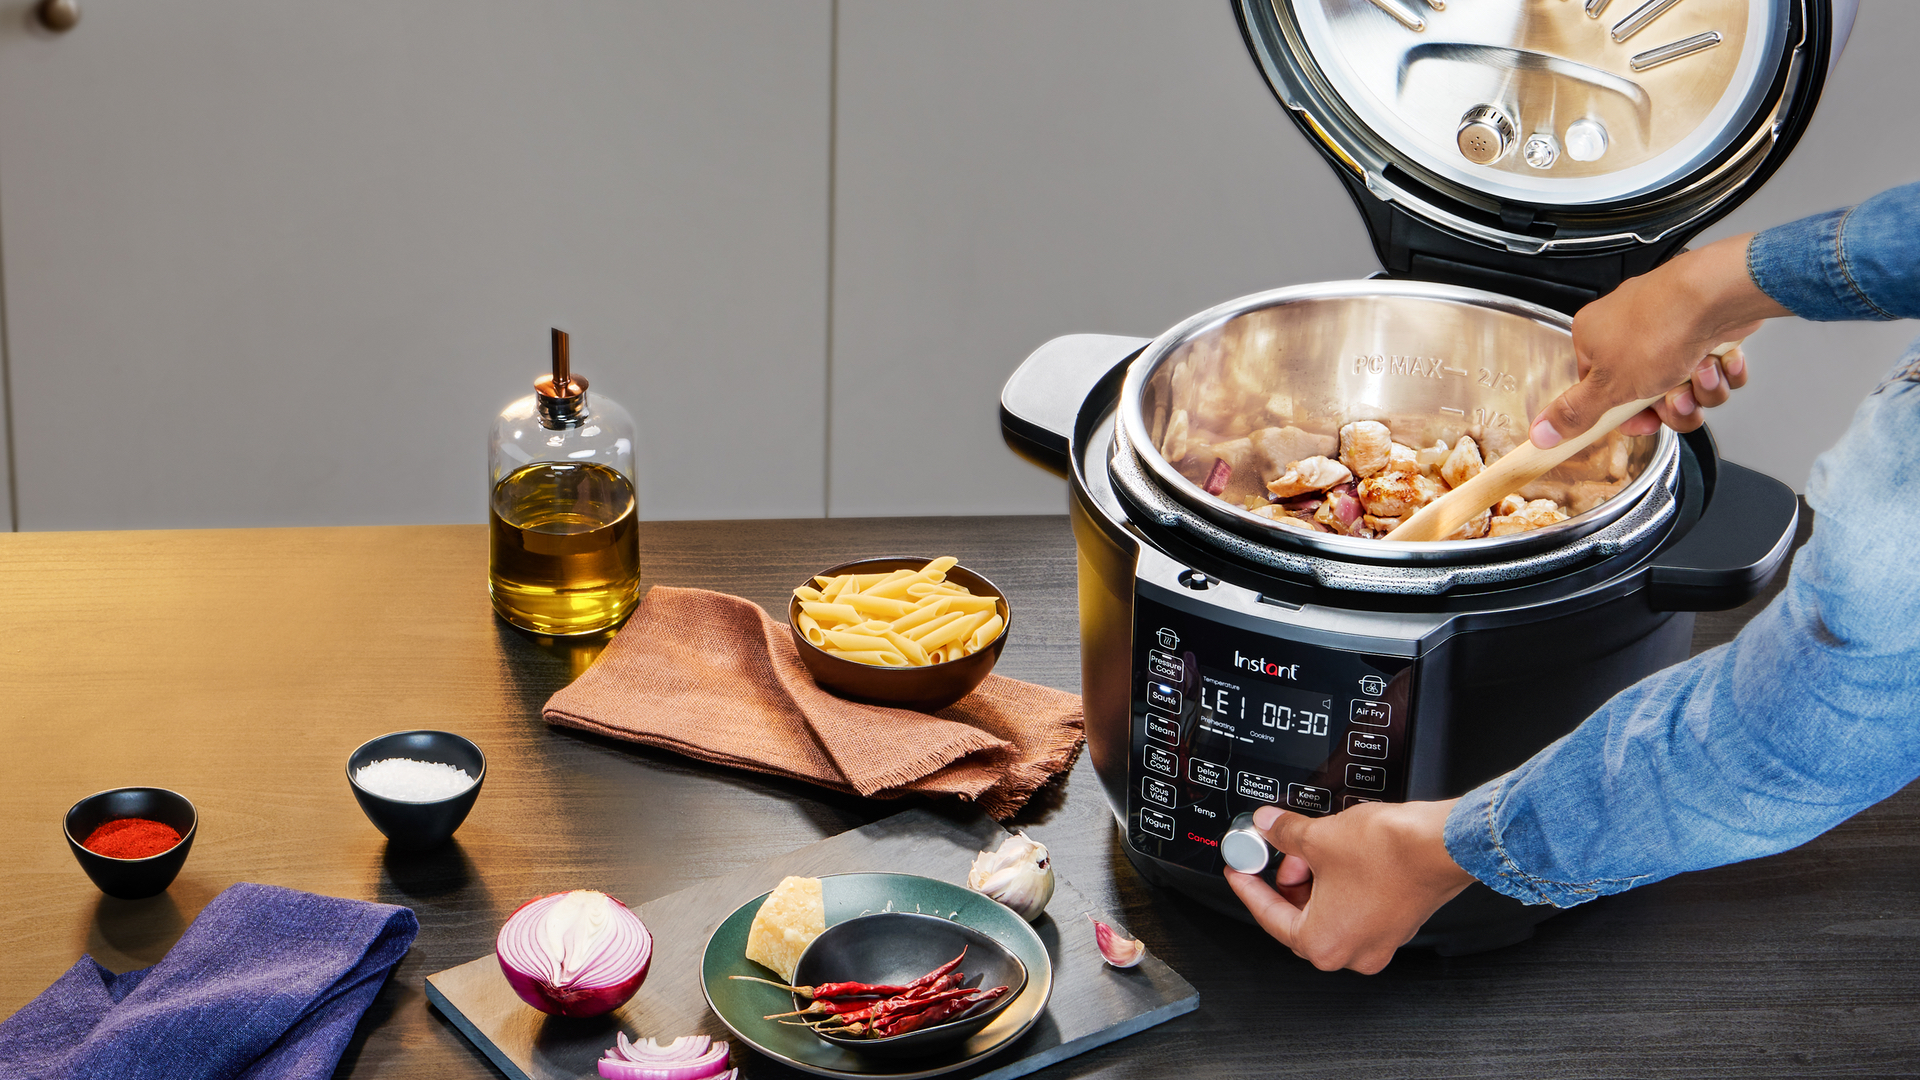 Instant Pot Duo Crisp with Ultimate Lid review